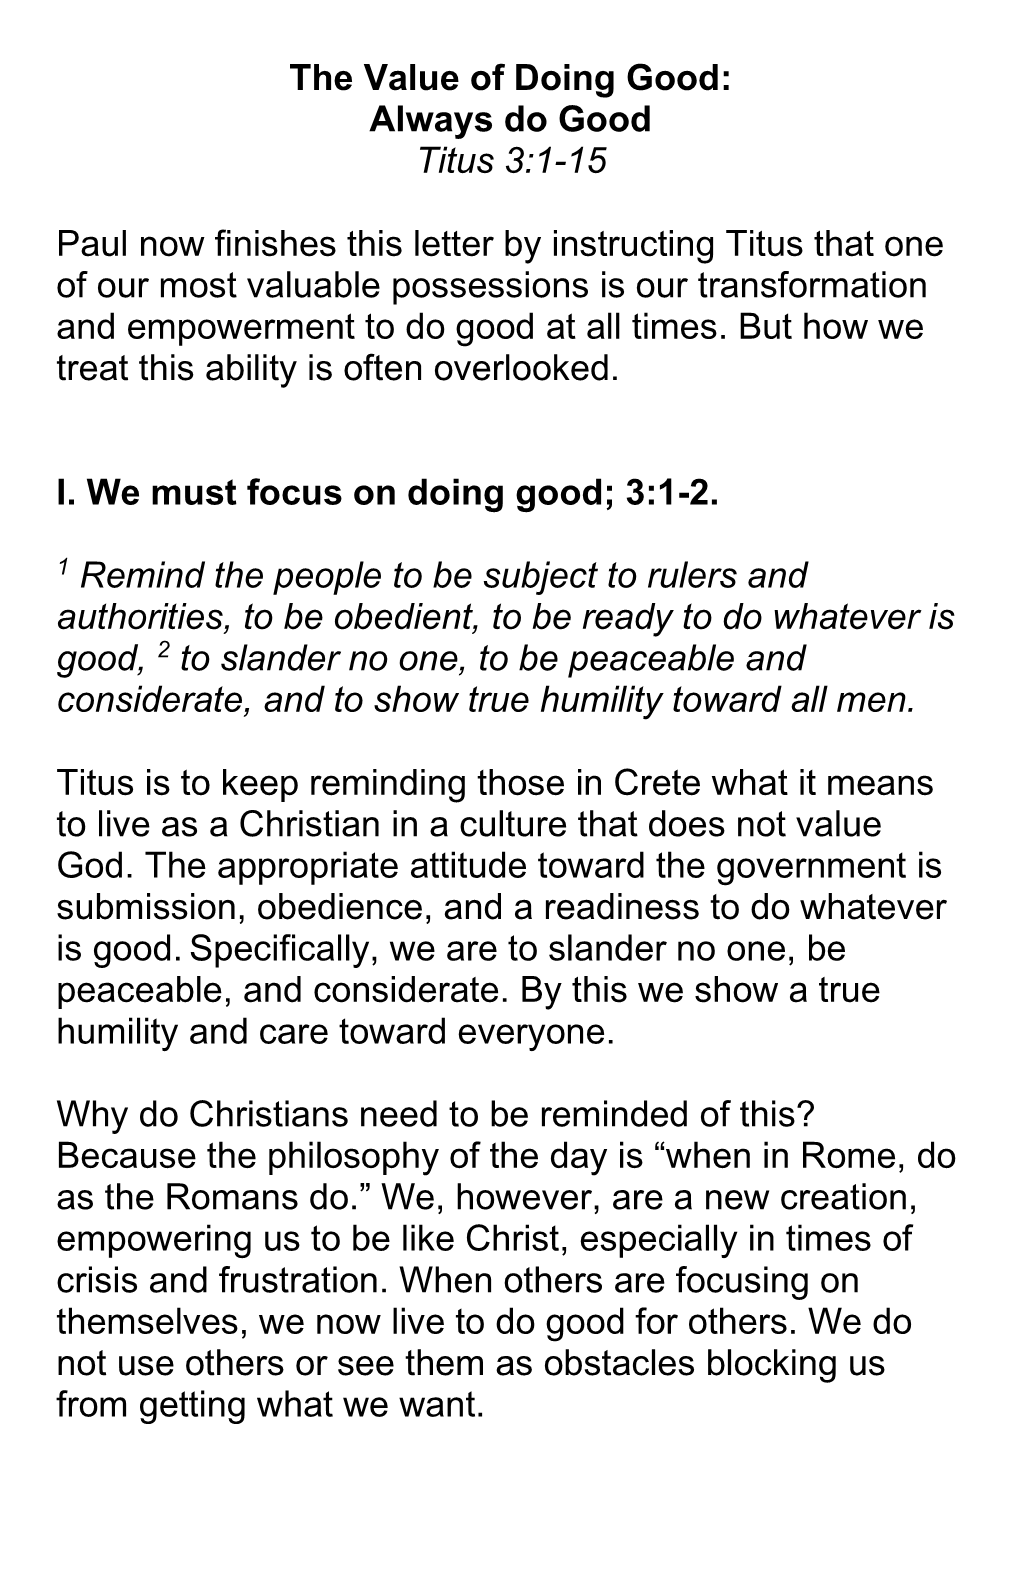 The Value of Doing Good: Always Do Good Titus 3:1-15